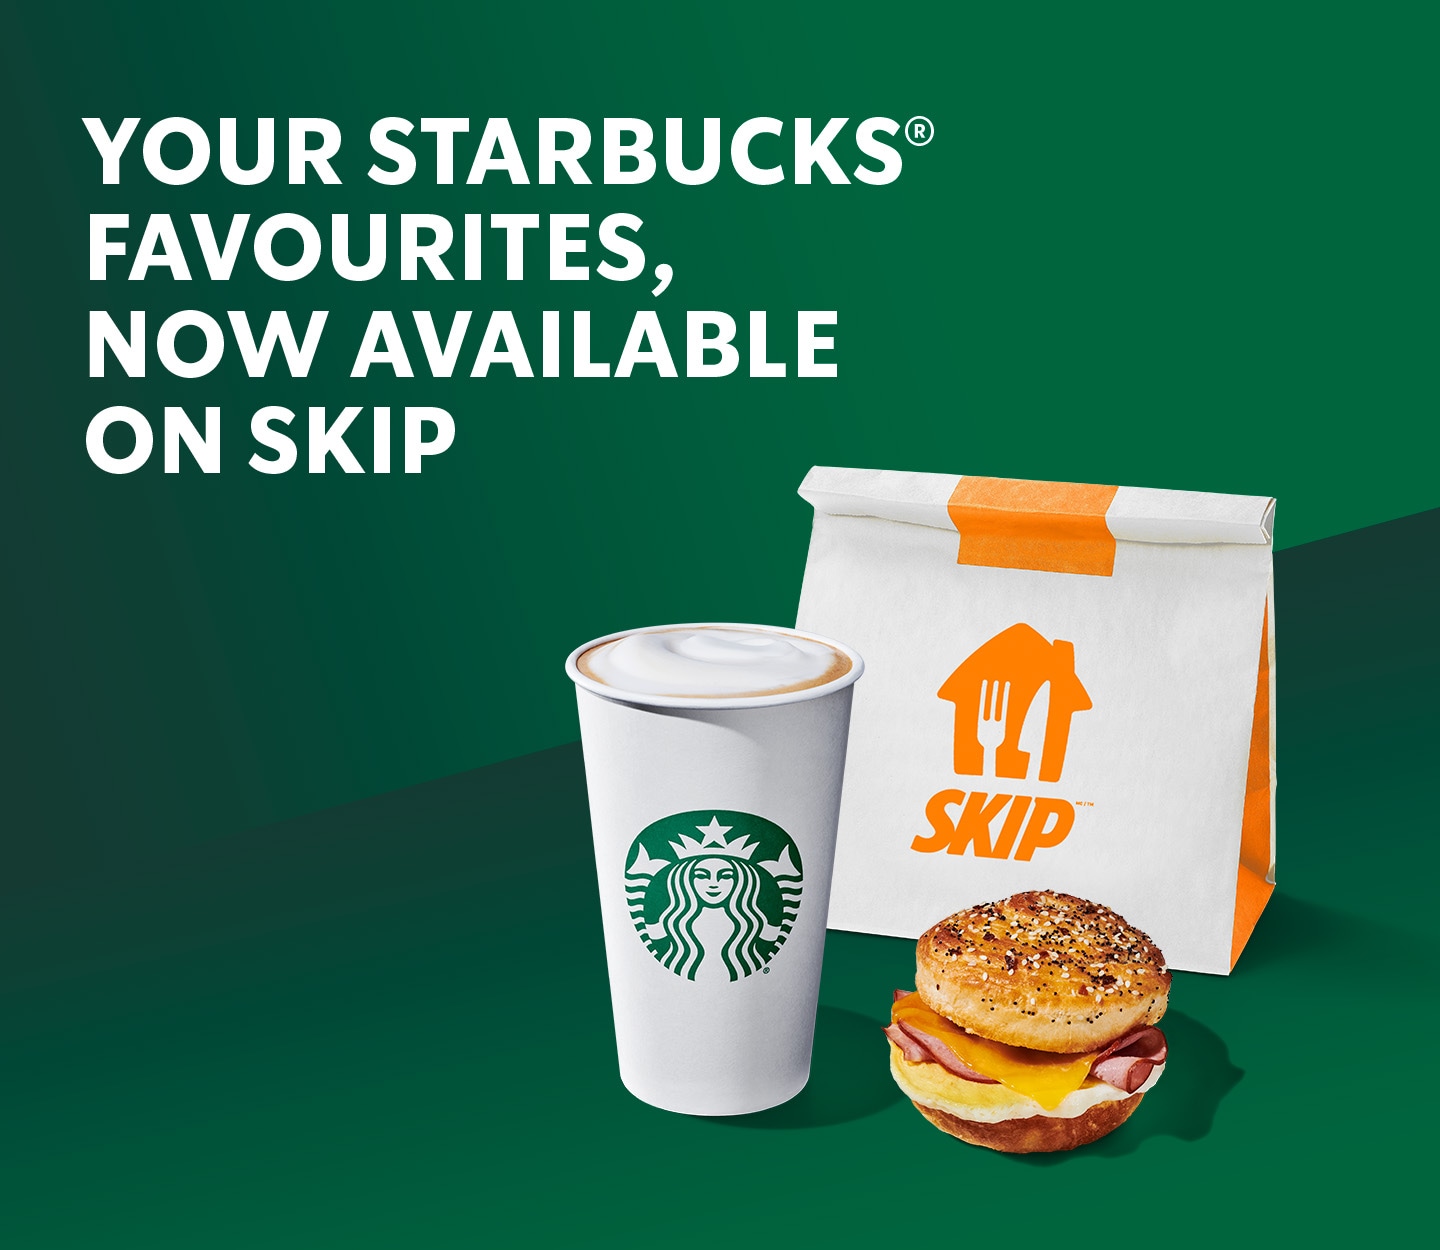 YOUR STARBUCKS FAVOURITES NOW ON SKIP | Starbucks products with Skip takeout bag